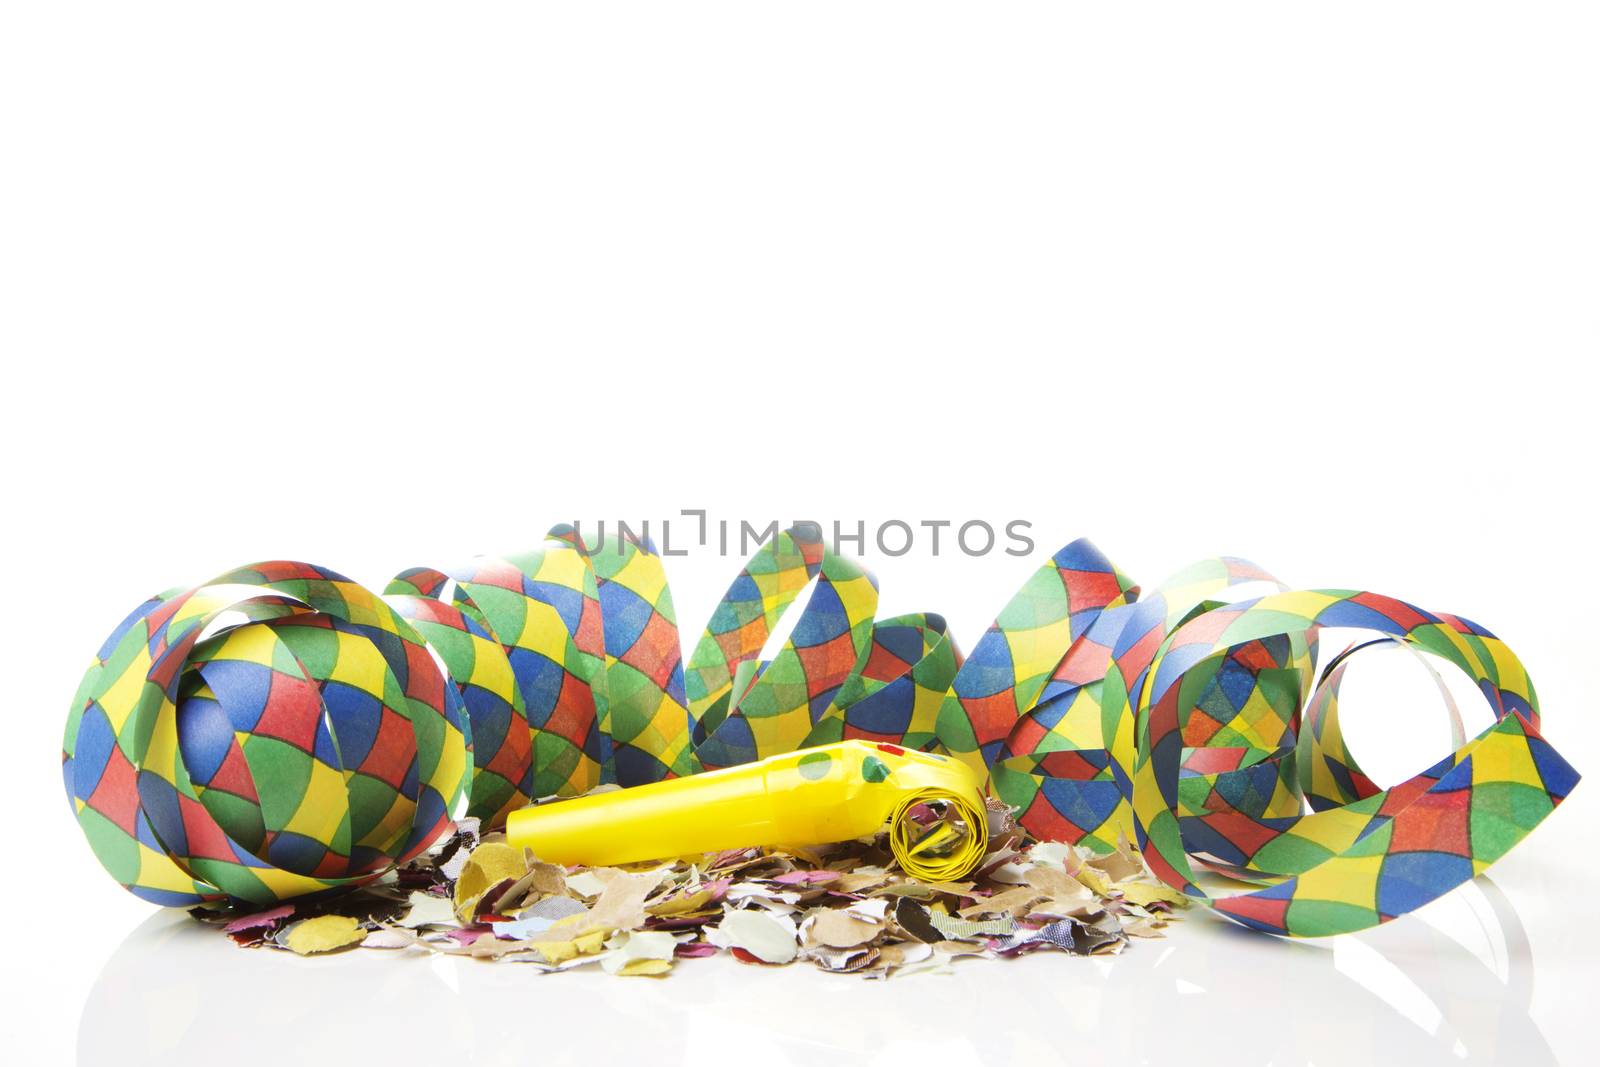 streamers and confetti as decoration for parties, sylvester with white background 